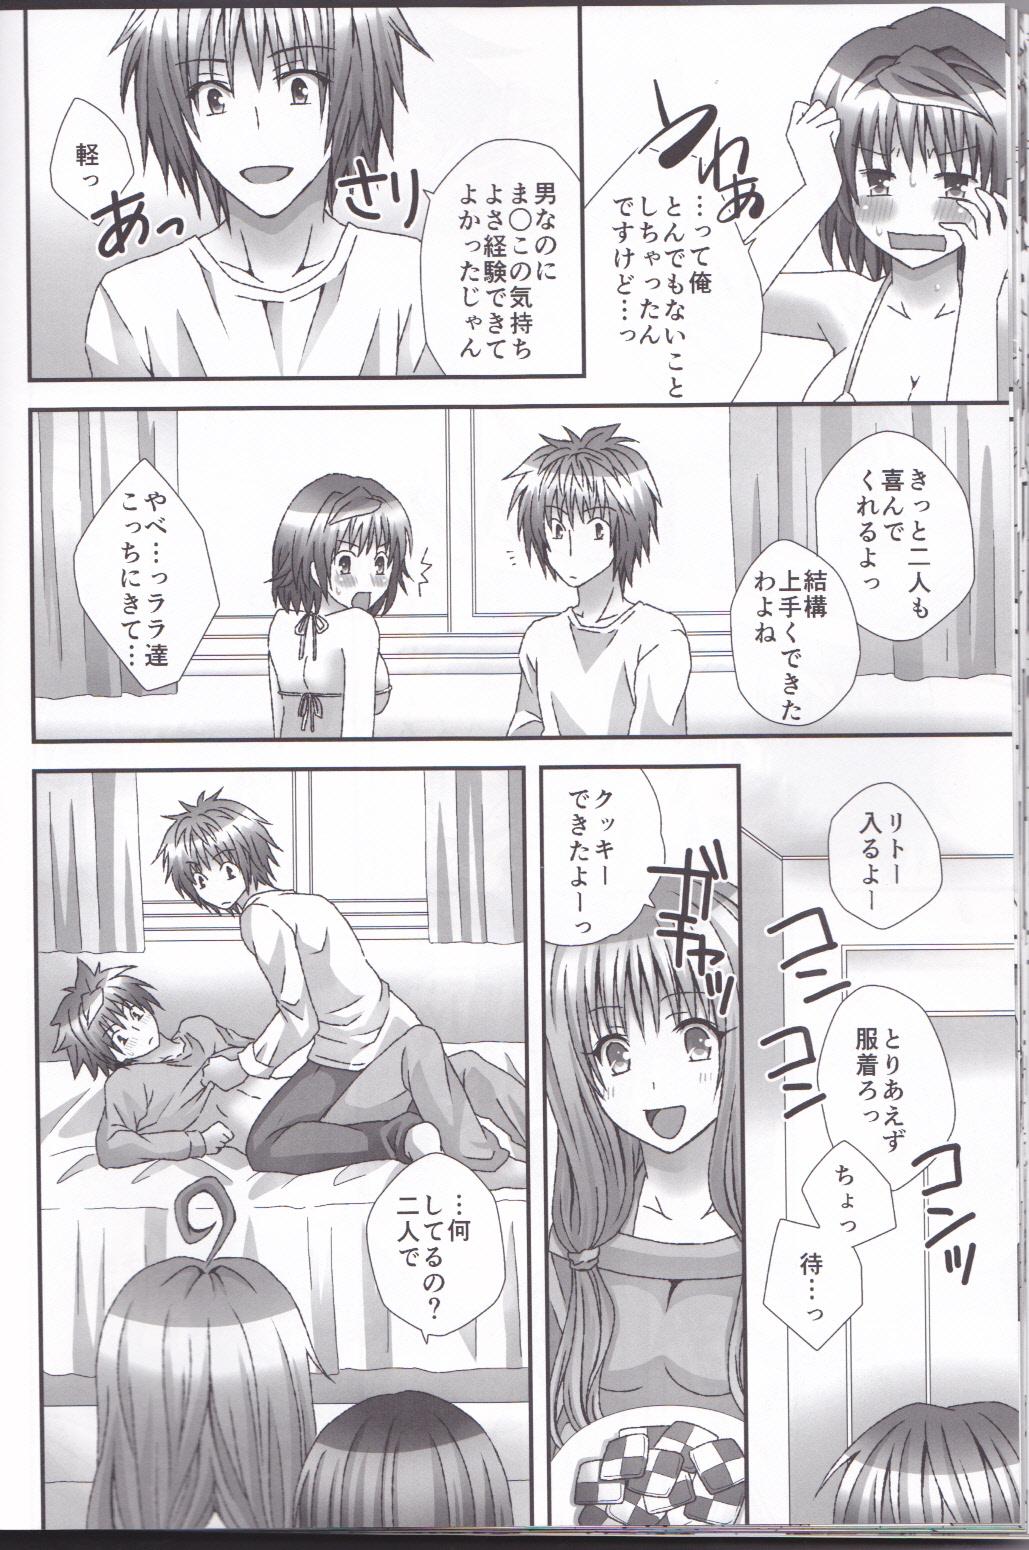 Trans Trap Page 19 Of 34 to love-ru hentai haven, Trans Trap Page 19 Of 34 ...